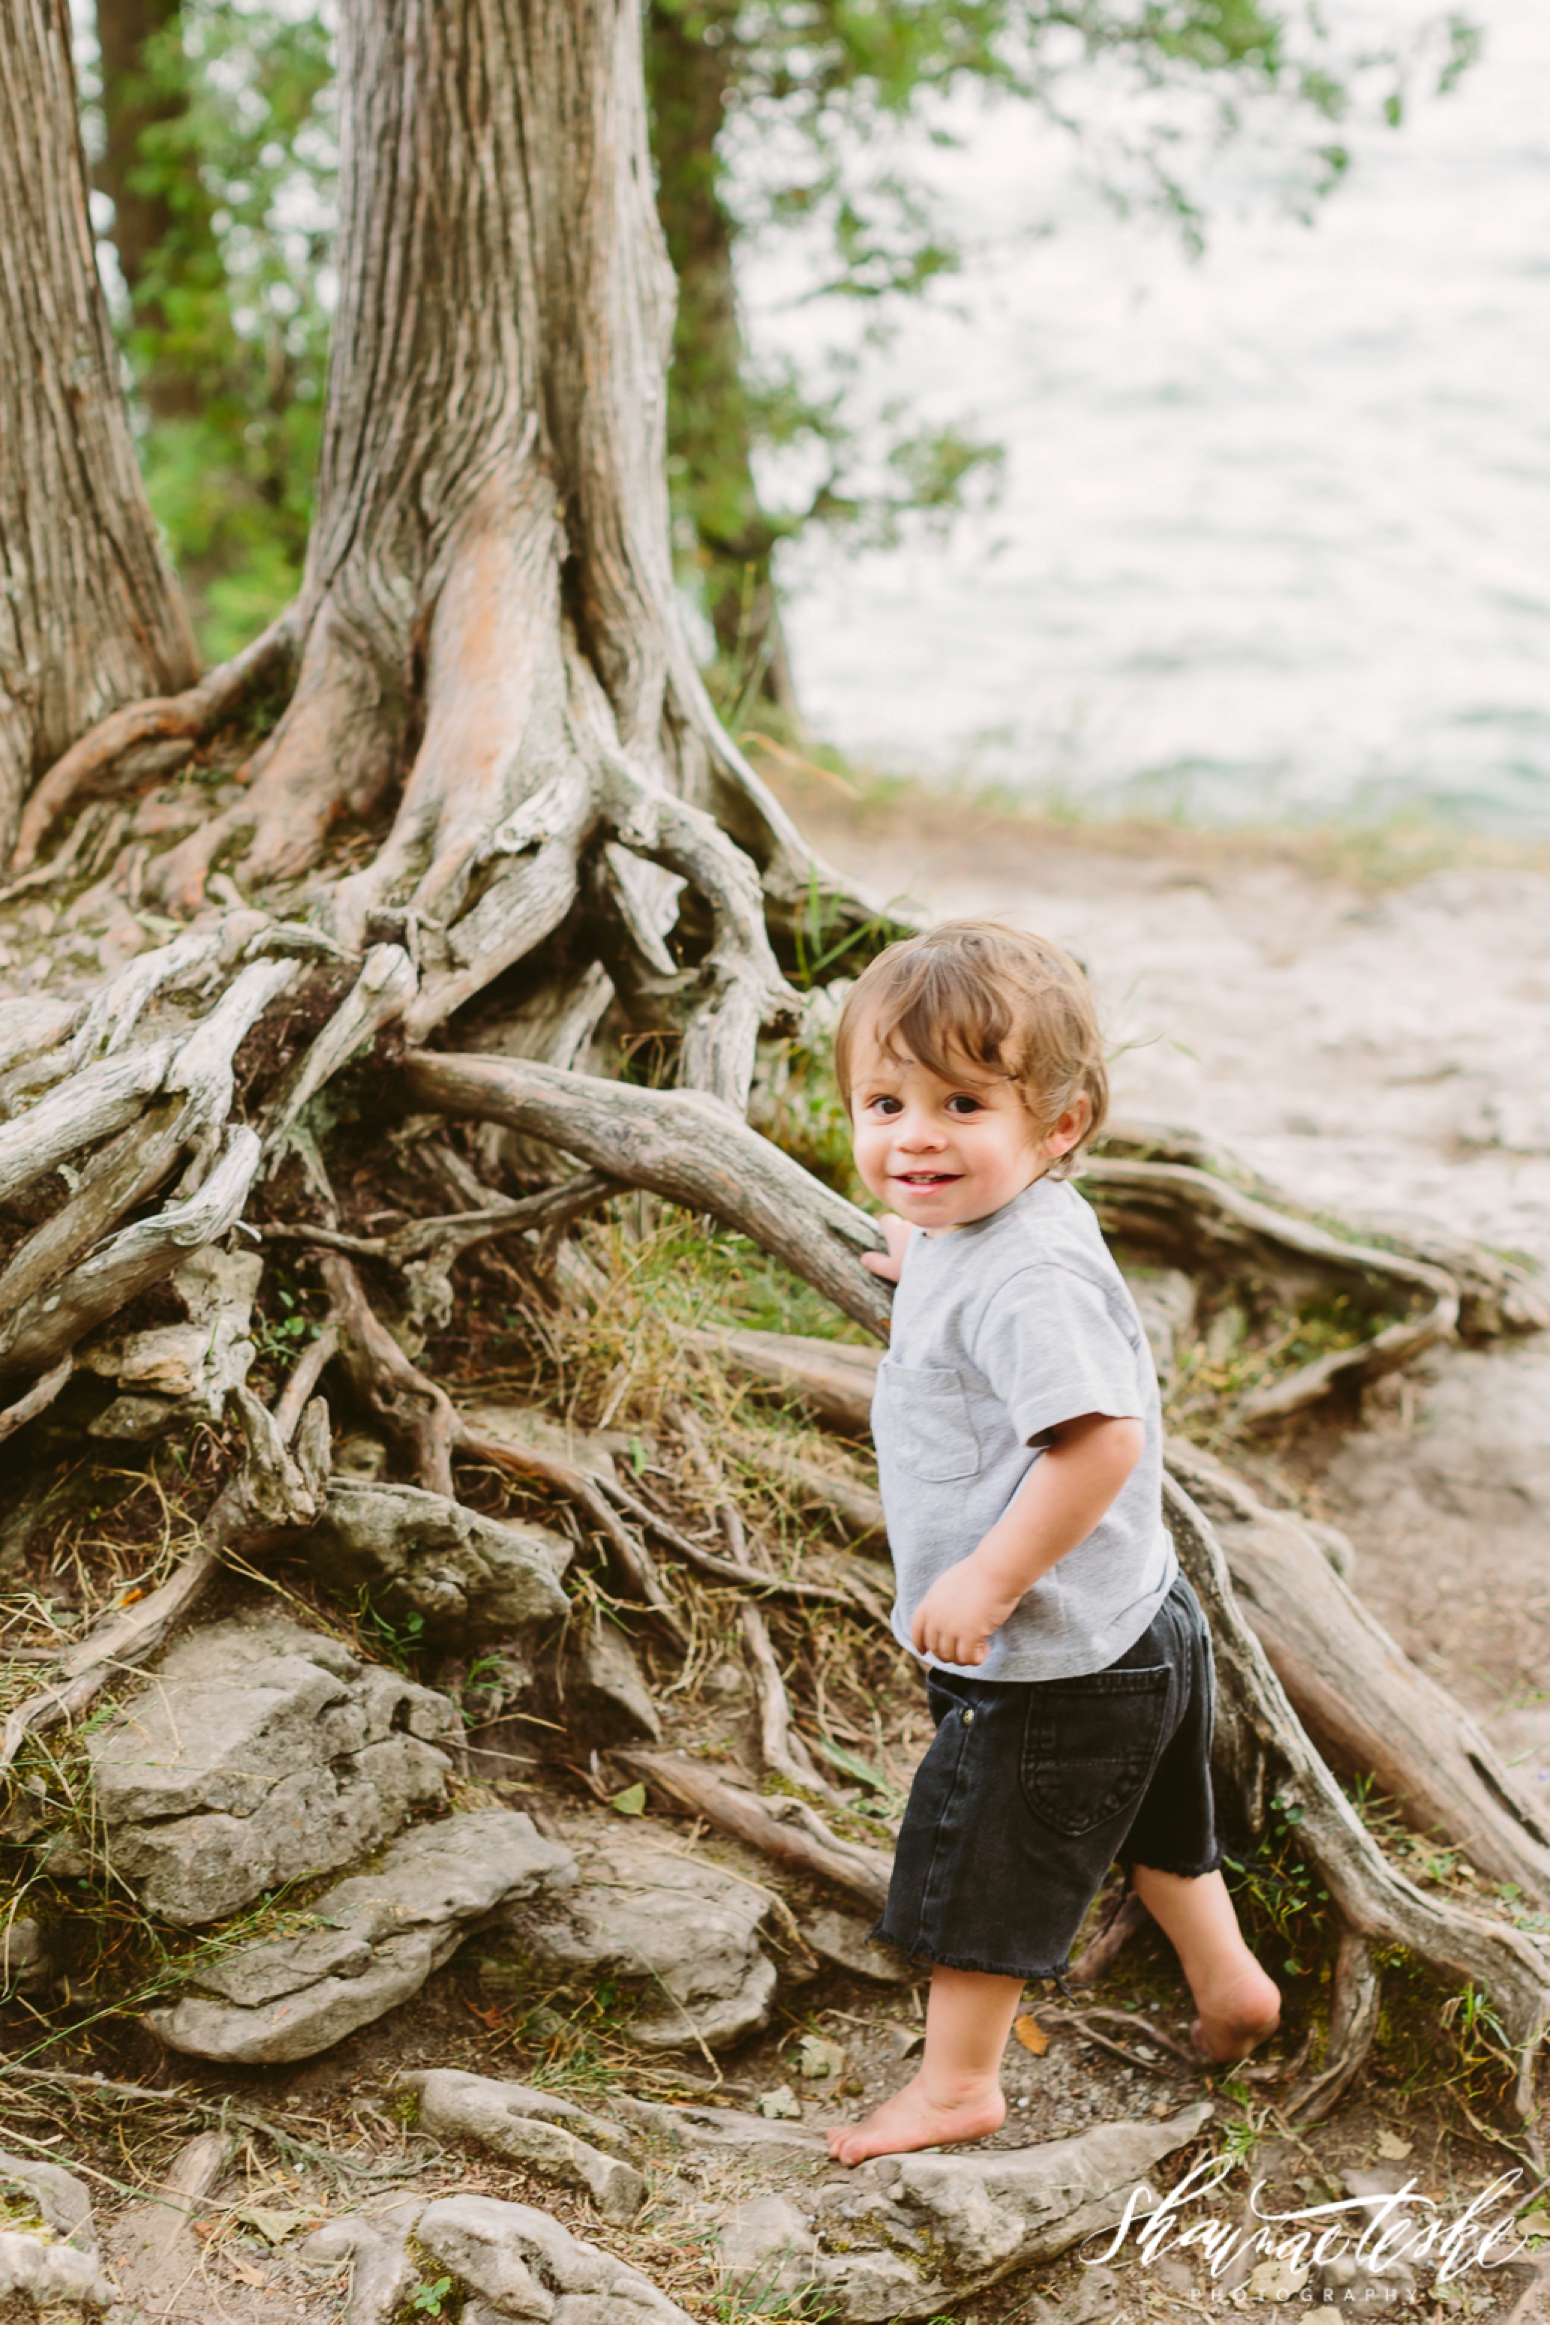 shaunae_teske_wisconsin_photographer_family-cave-point-door-county-wolfgang-symphony-4